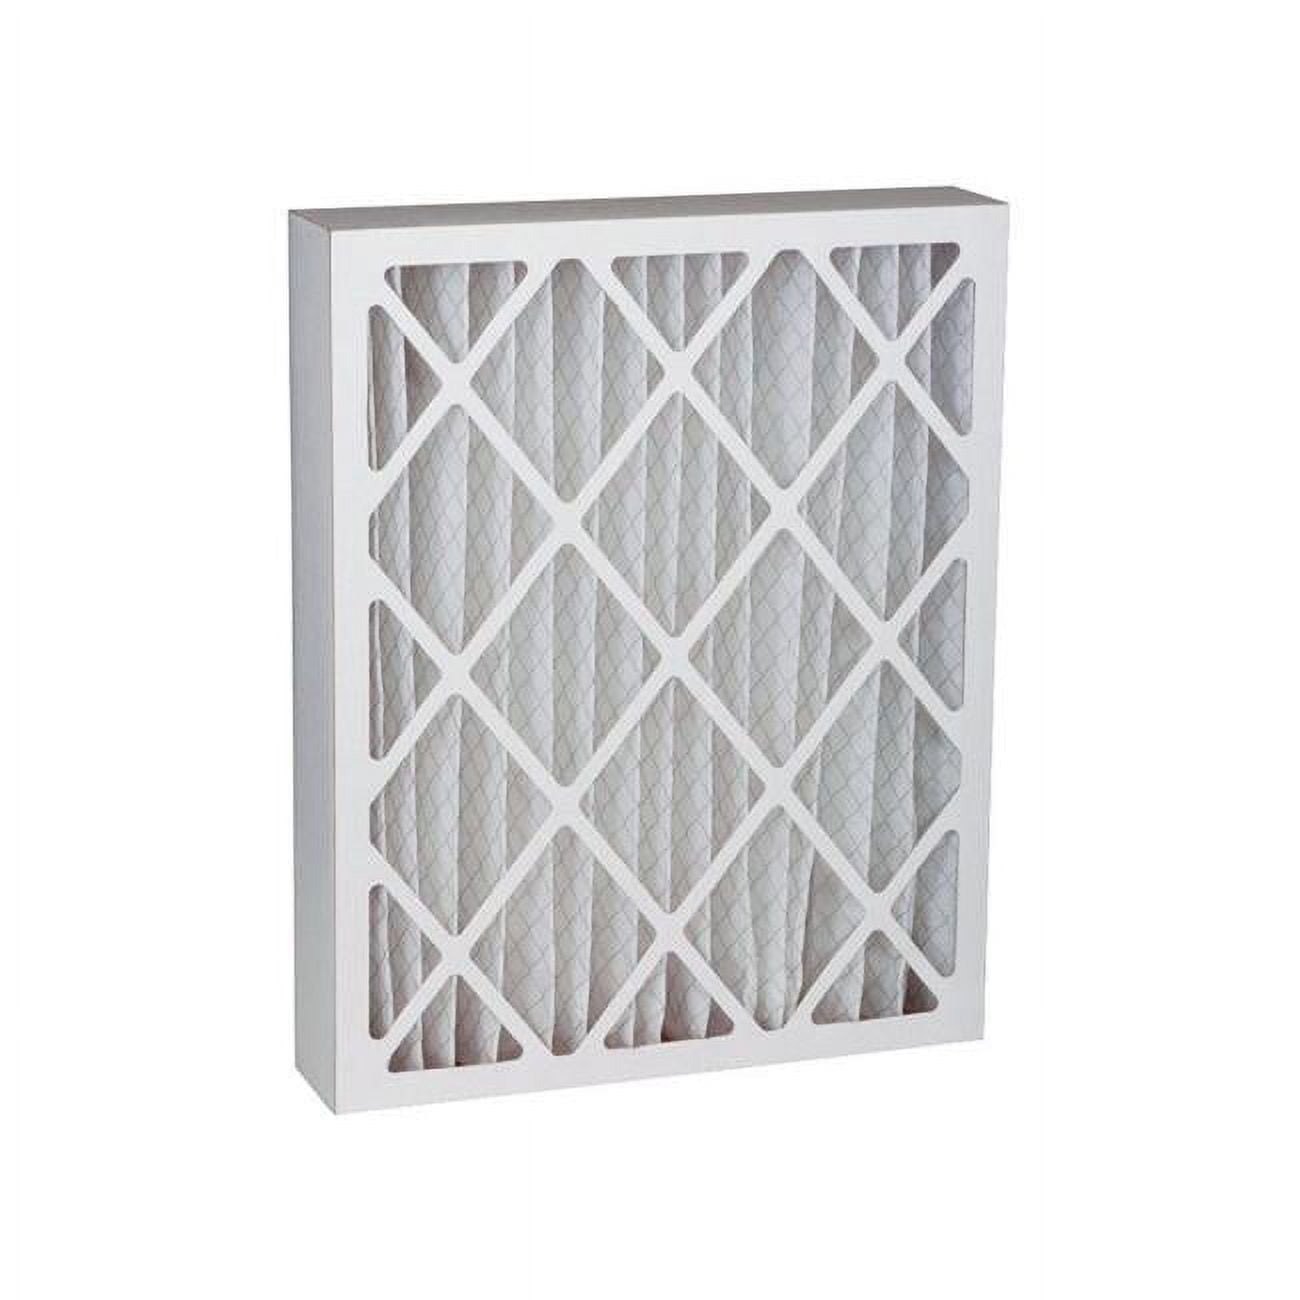 Picture of Best Air 4822821 20 x 16 x 4 in. 8 MERV Pleated Furnace Filter - Case of 3